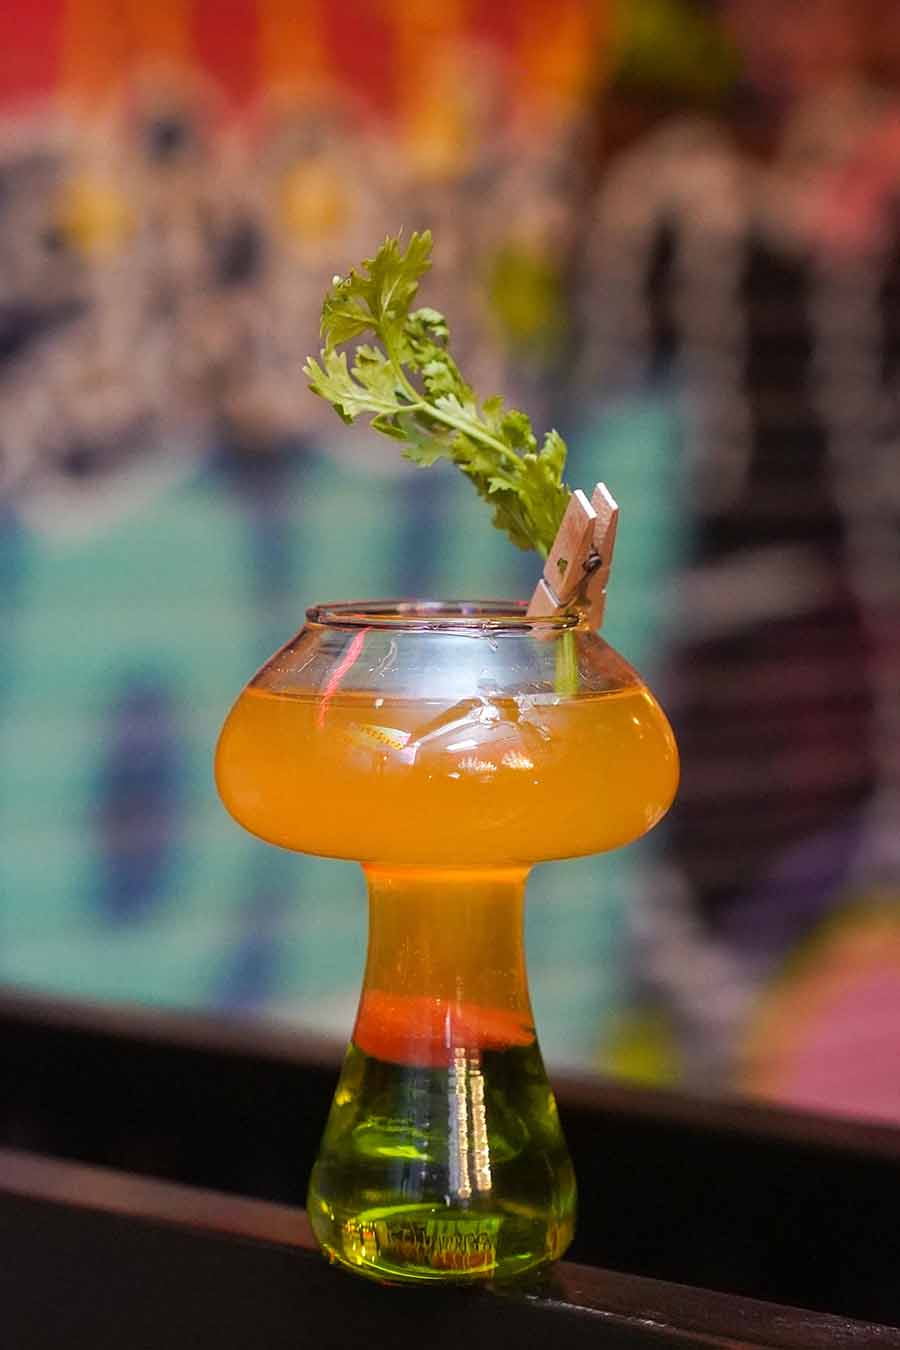 Pinacori: Warm up with Pinacori, a winter-ready rum cocktail at Traffic Gastropub. This spicy concoction is crafted from white rum, pineapple juice and coriander syrup, with a hint of local spices. Pocket pinch: Rs 599